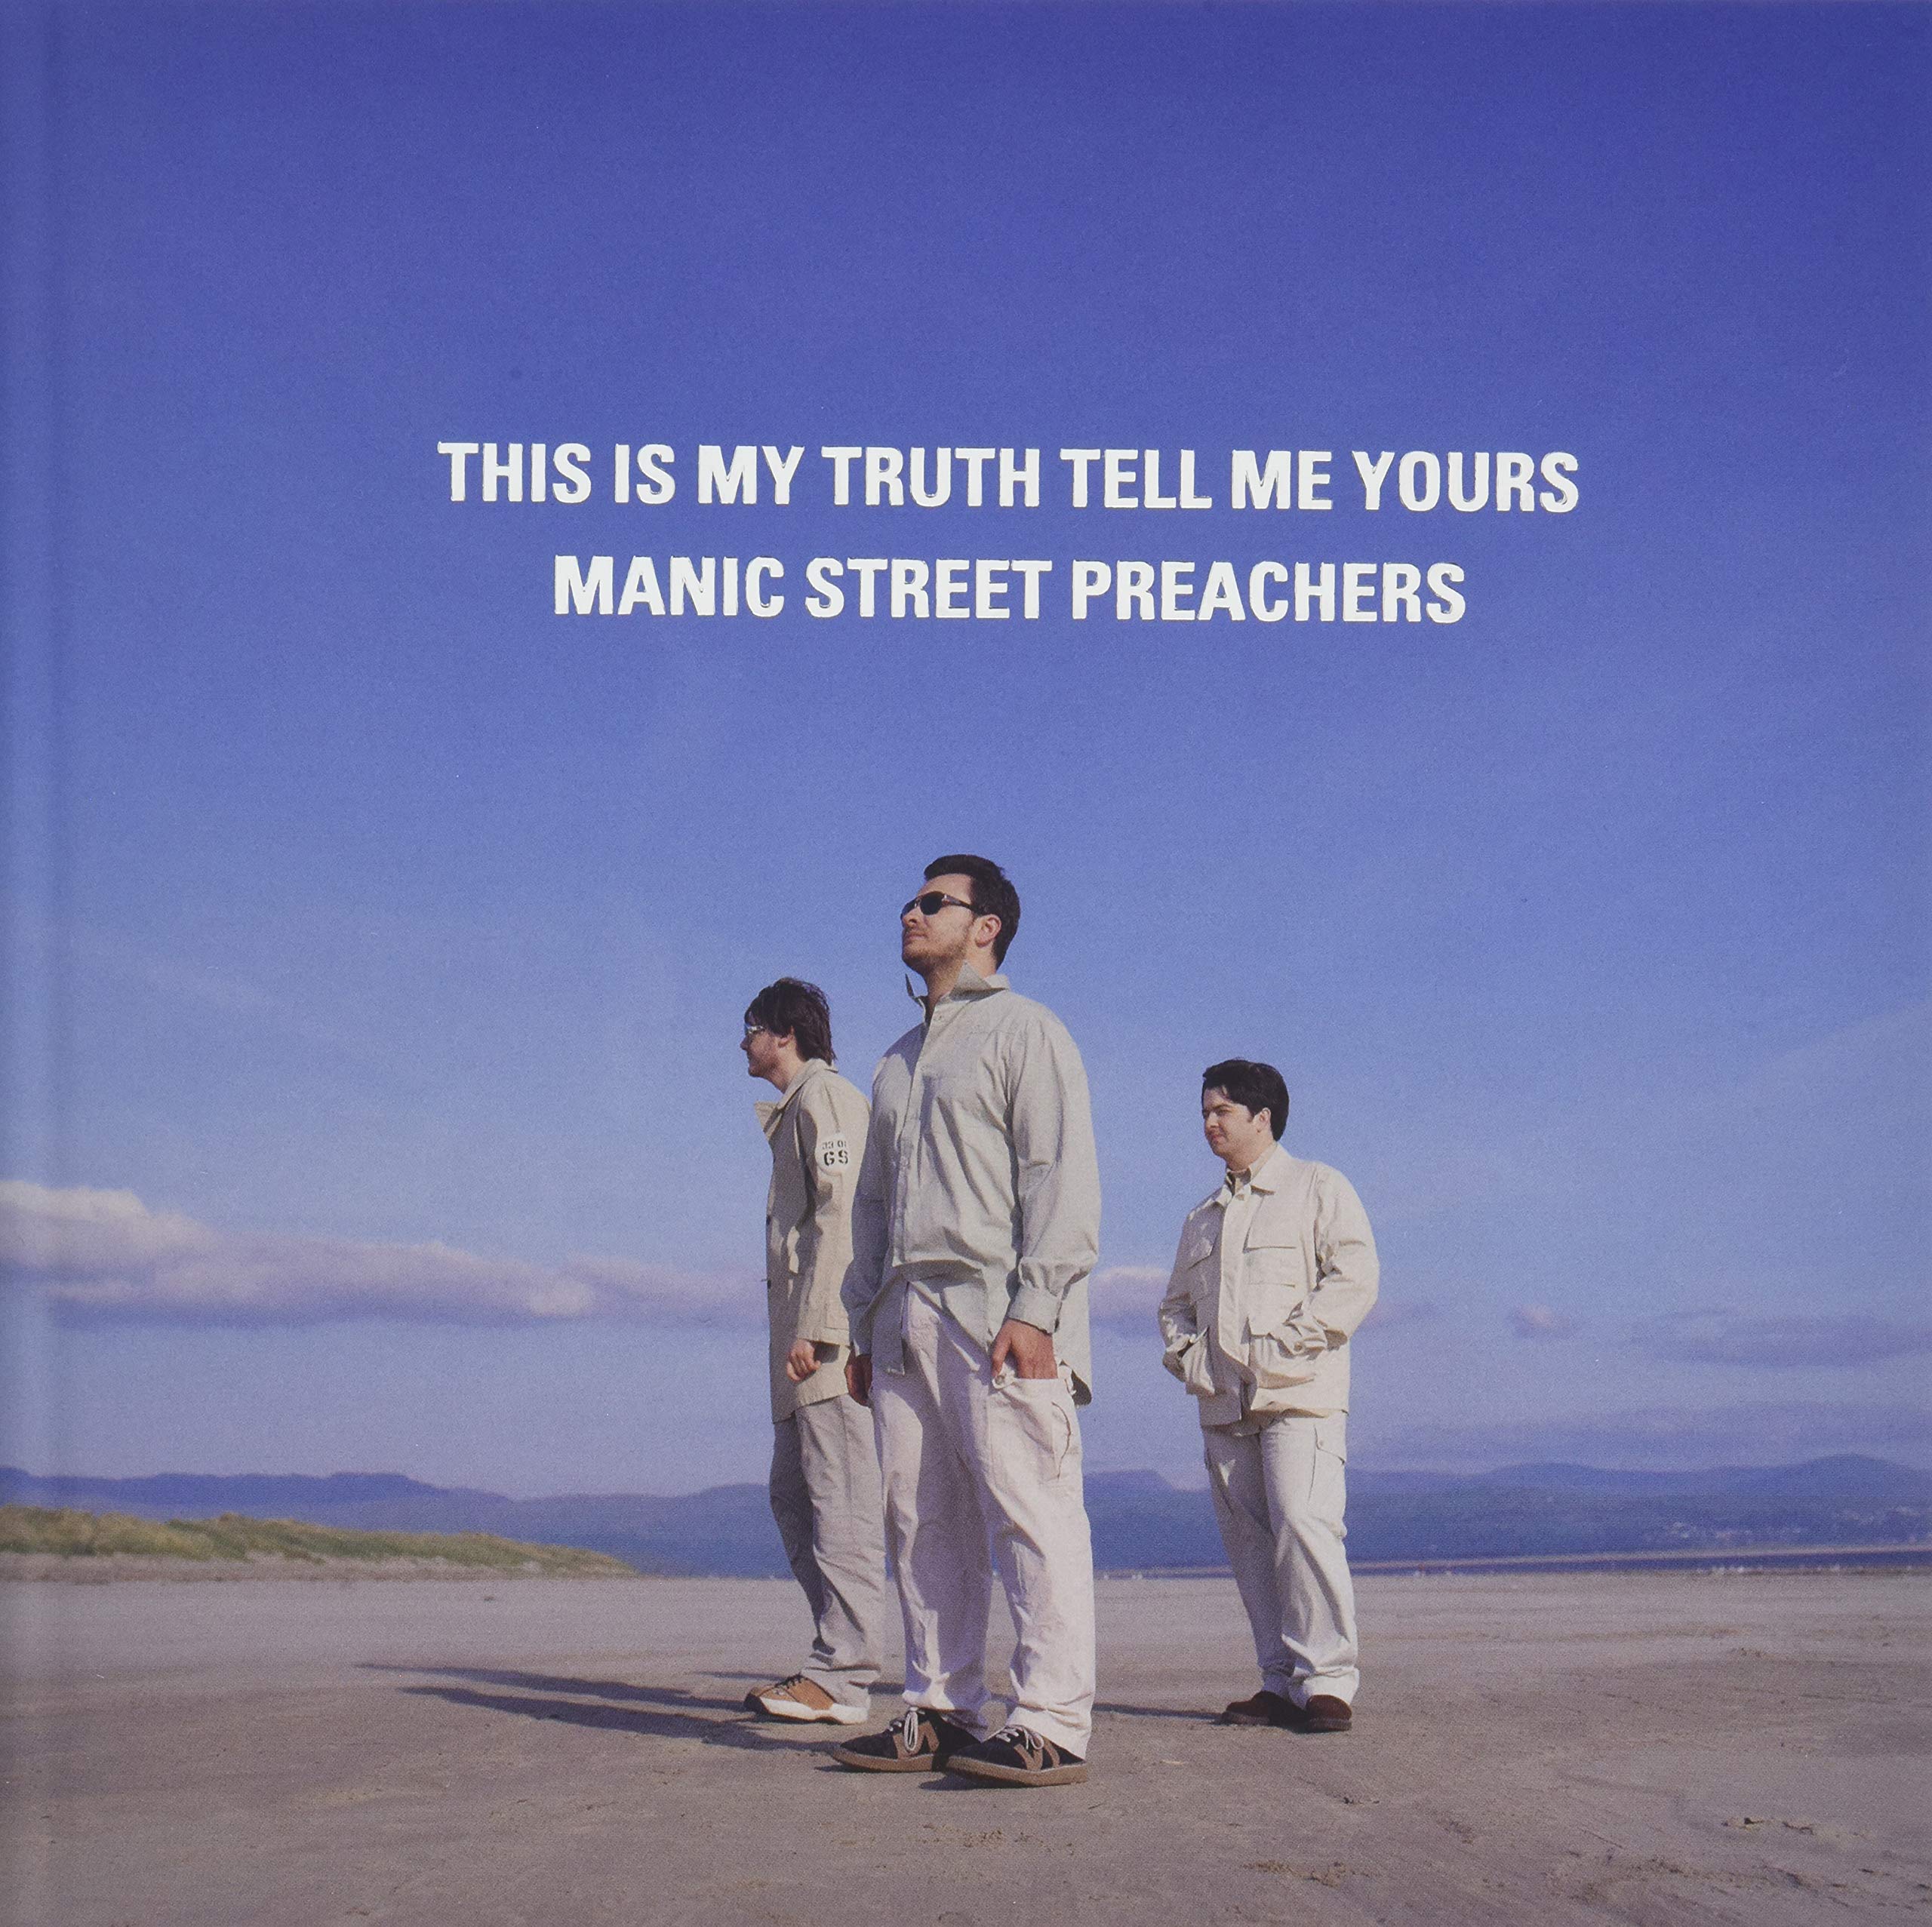 Manic Street Preachers-This Is My Truth Tell Me Yours (20 Year Collectors Edition)-REMASTERED-16BIT-WEB-FLAC-2018-ENRiCH Download